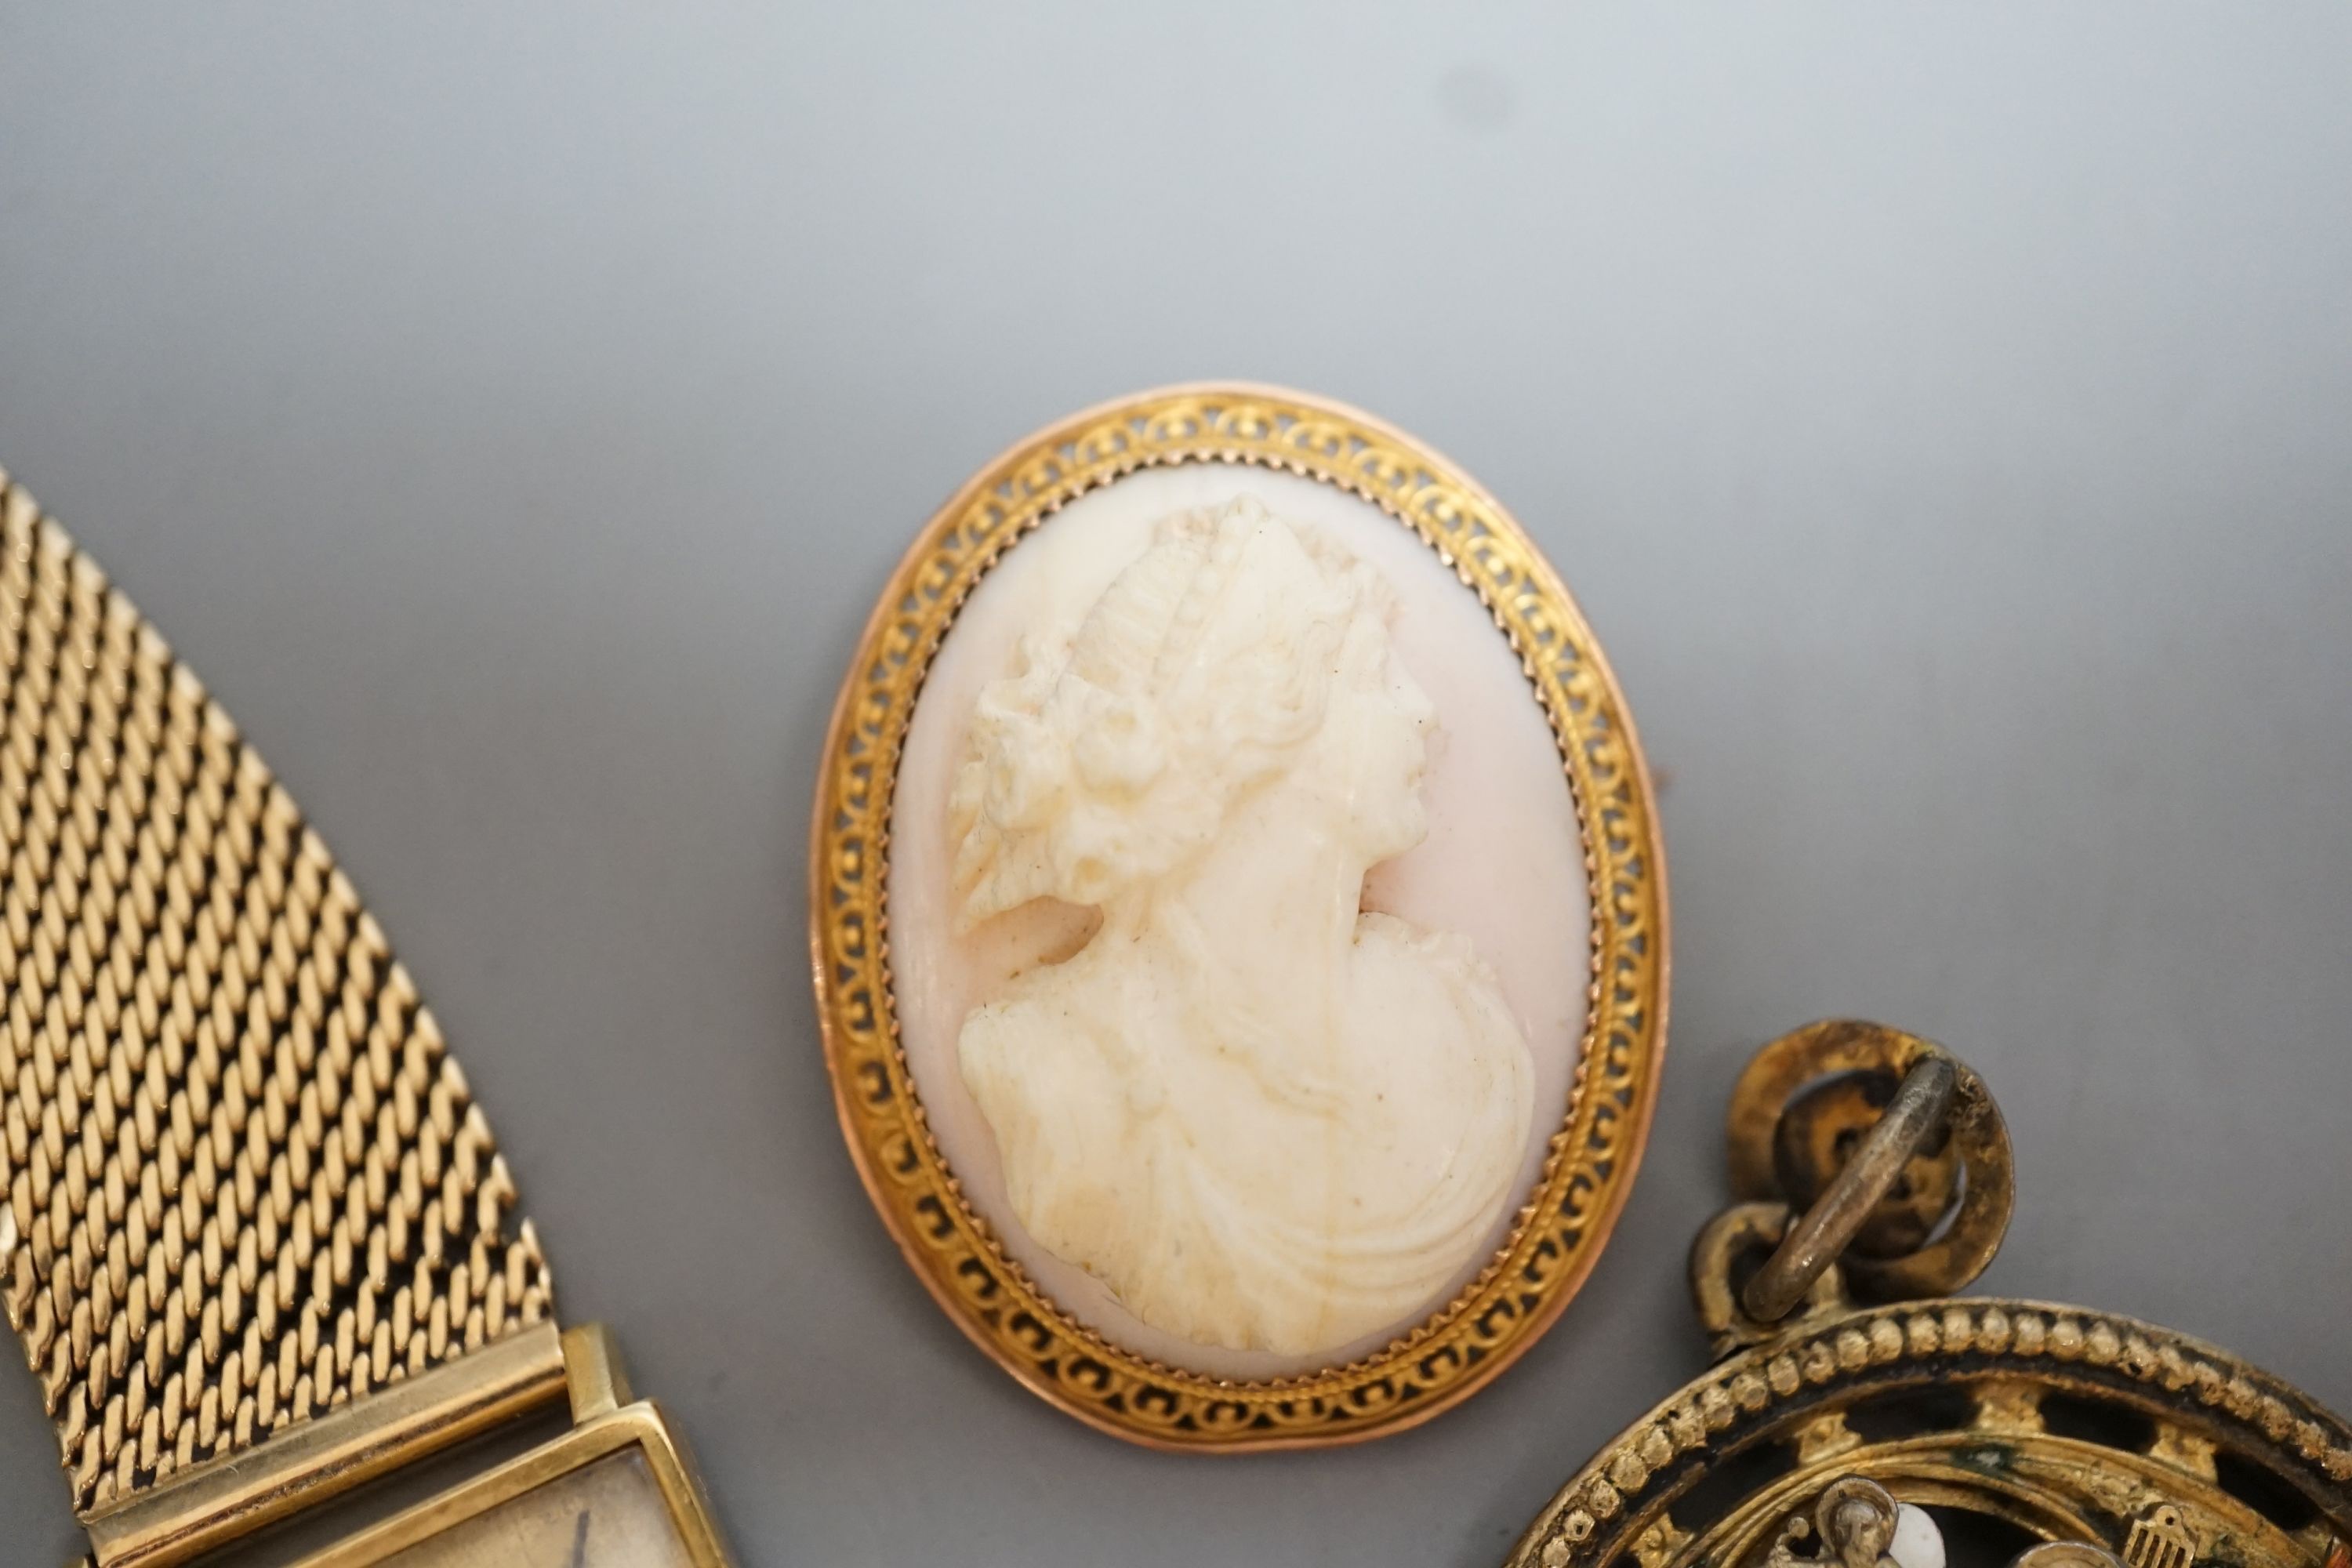 A gentleman's 18ct Marvin manual wind wrist watch, on a 9ct gold bracelet, gross 38.4 grams, a 9ct mounted oval cameo brooch cameo brooch and an enamelled gilt metal medallion.